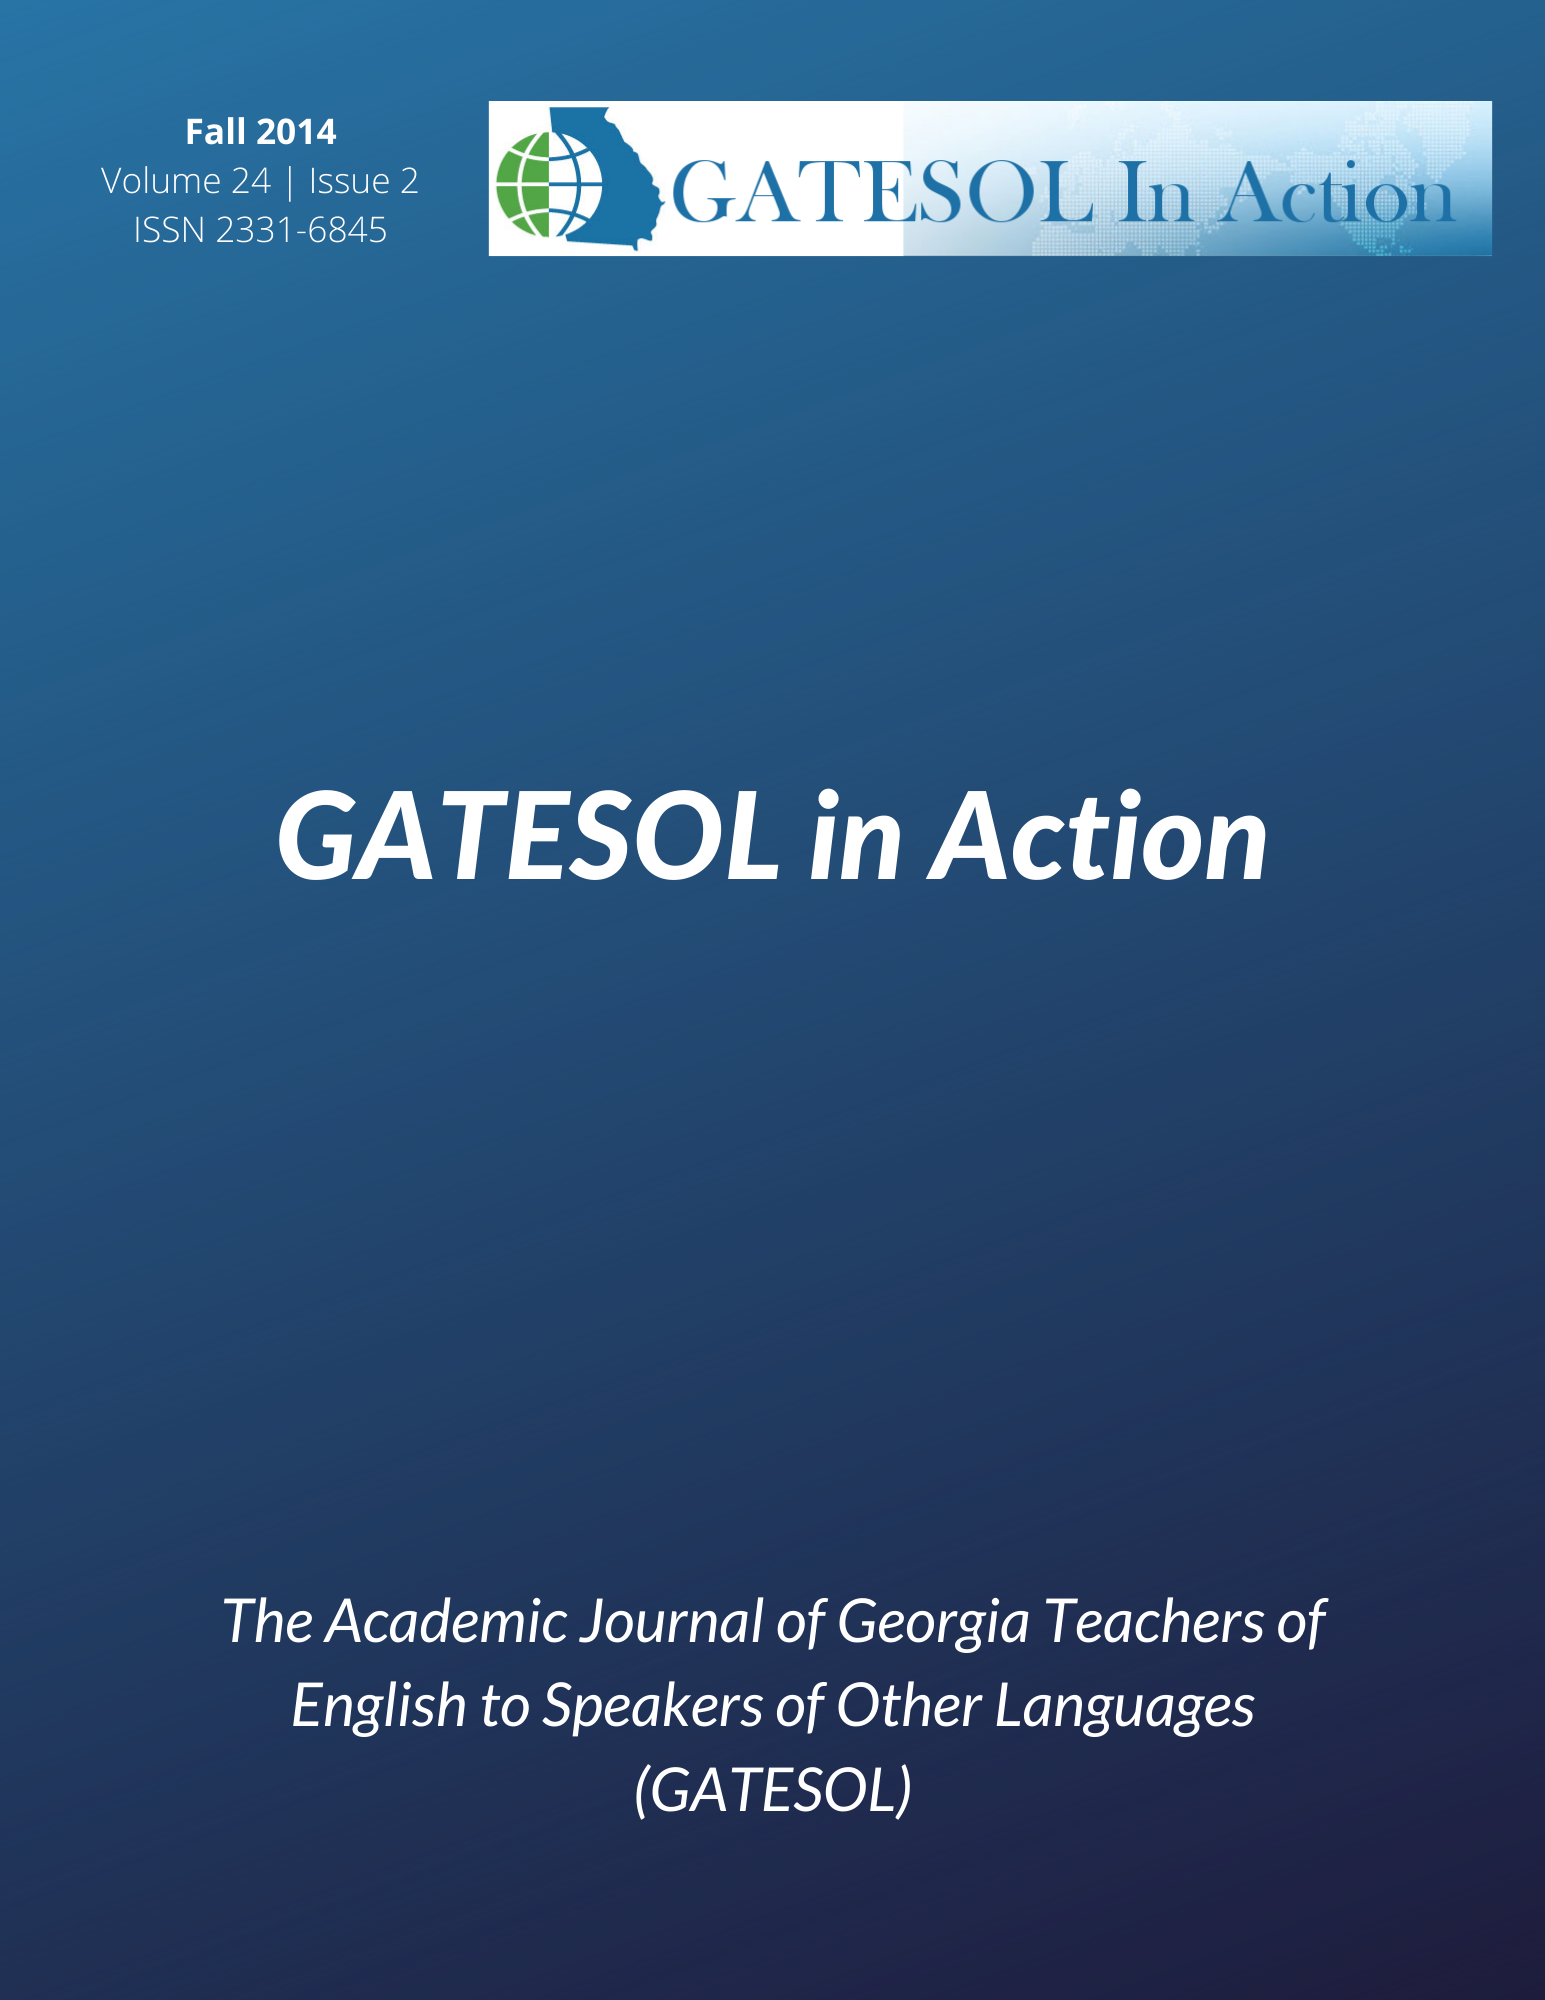 GATESOL in Action (Fall 2014, Volume 24, Issue 2)